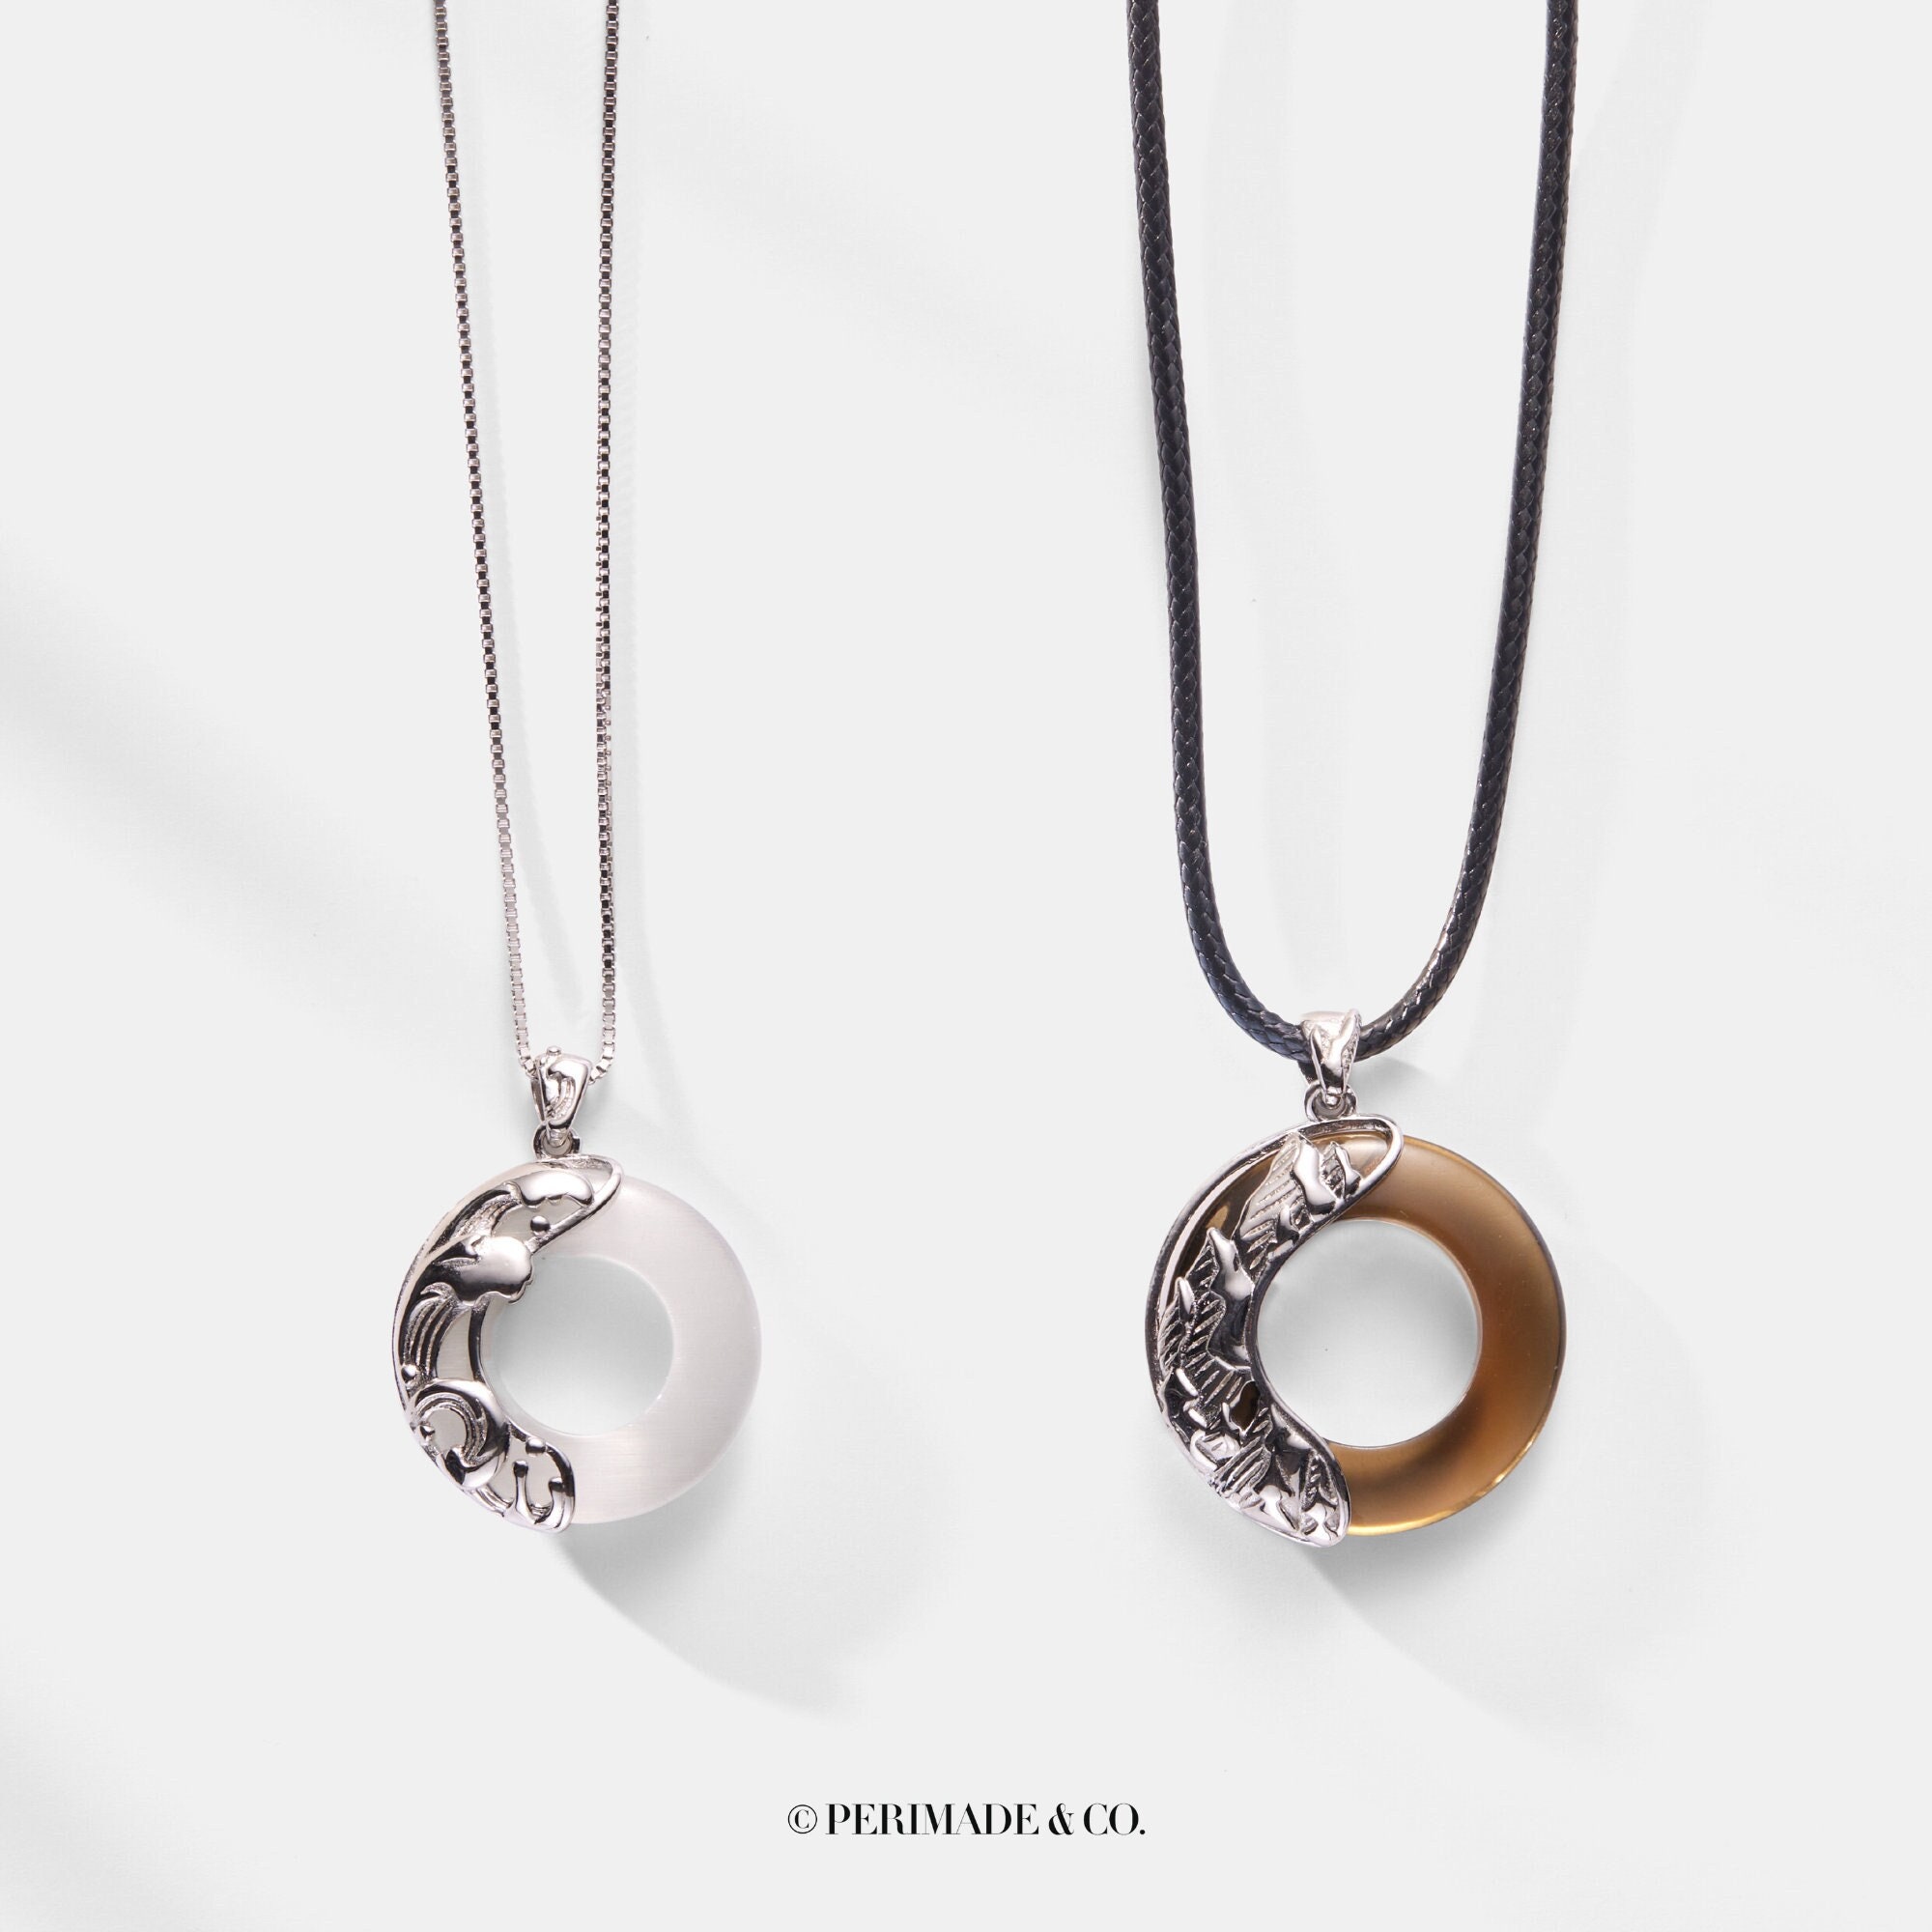 Matching Relationship Necklaces for Couples –